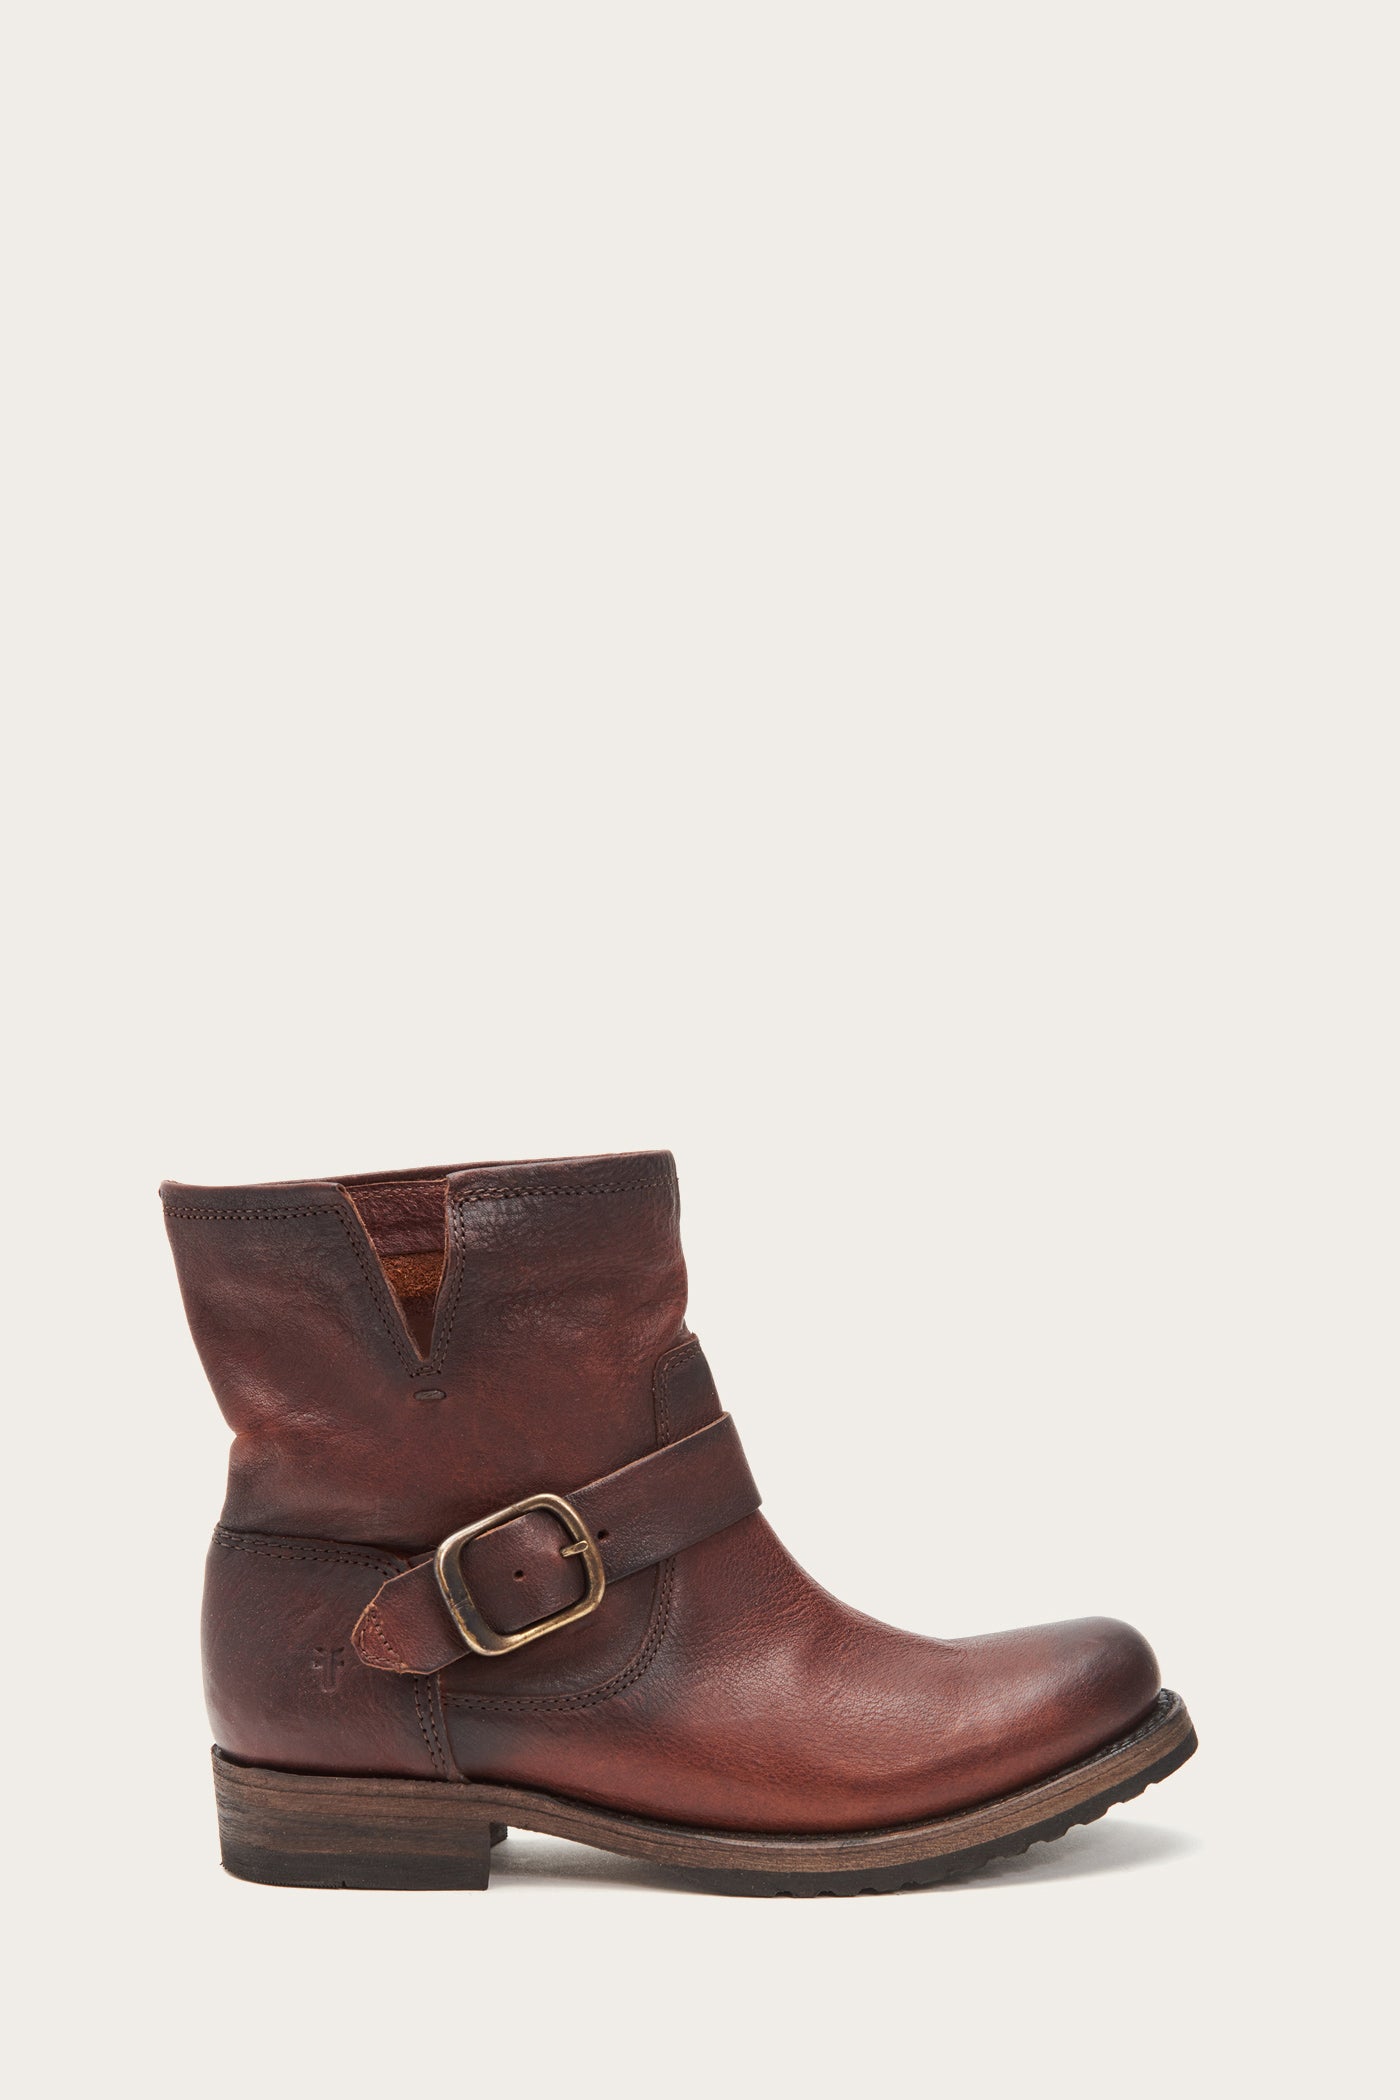 frye boots canada sale